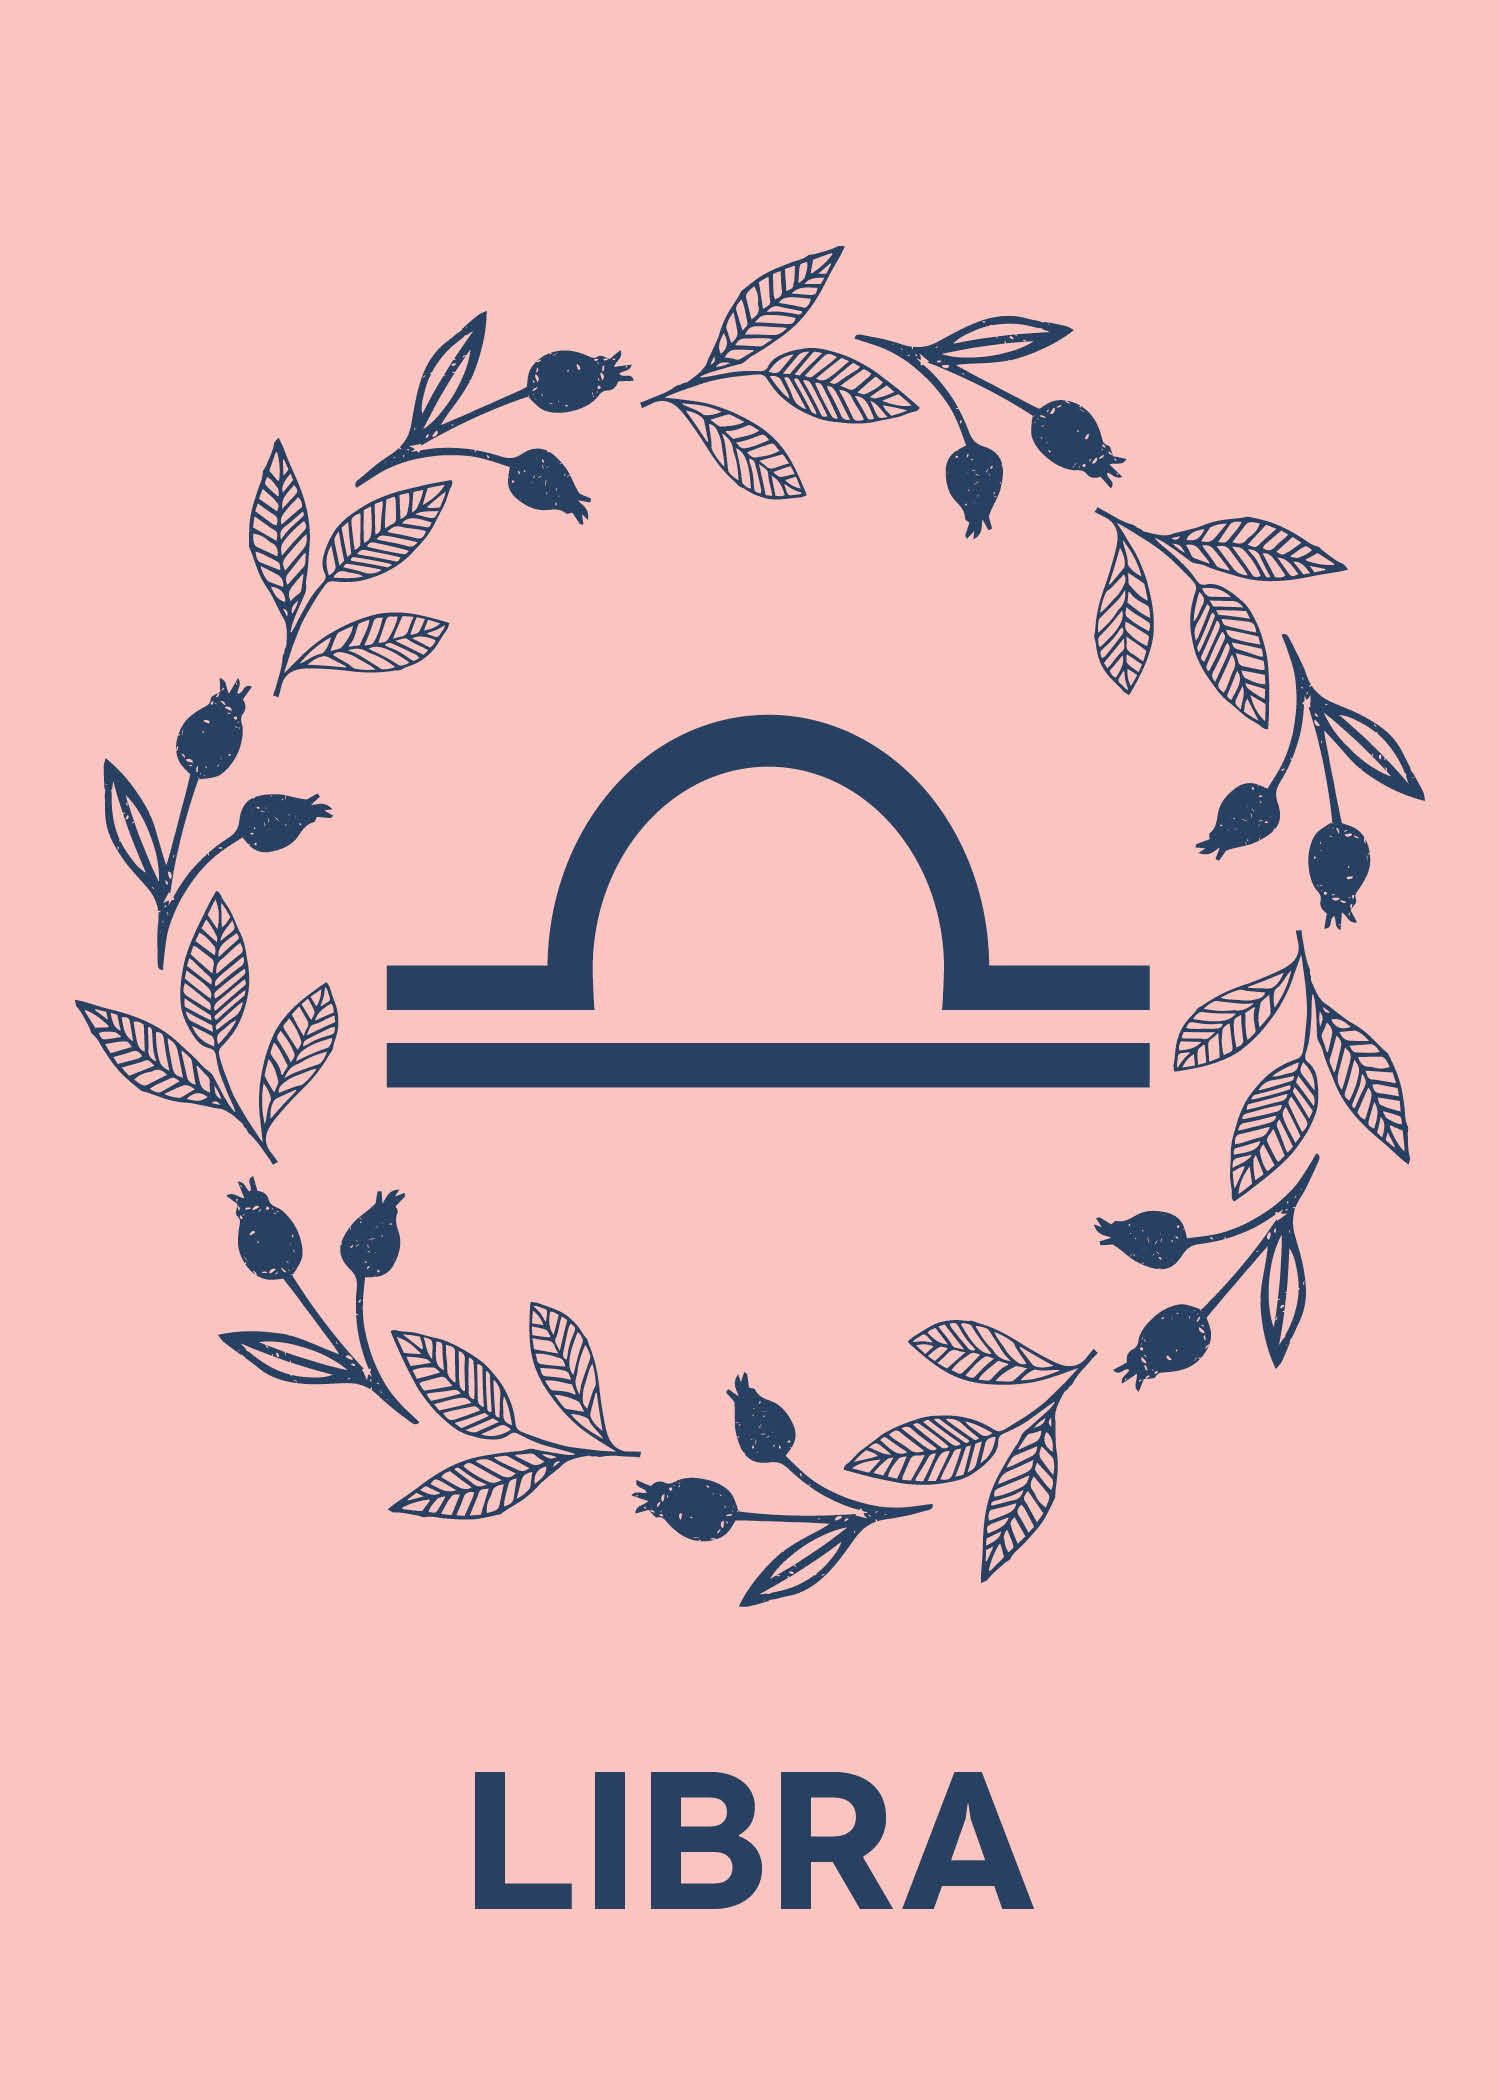 The zodiac sign libra is shown with a wreath of flowers - Libra